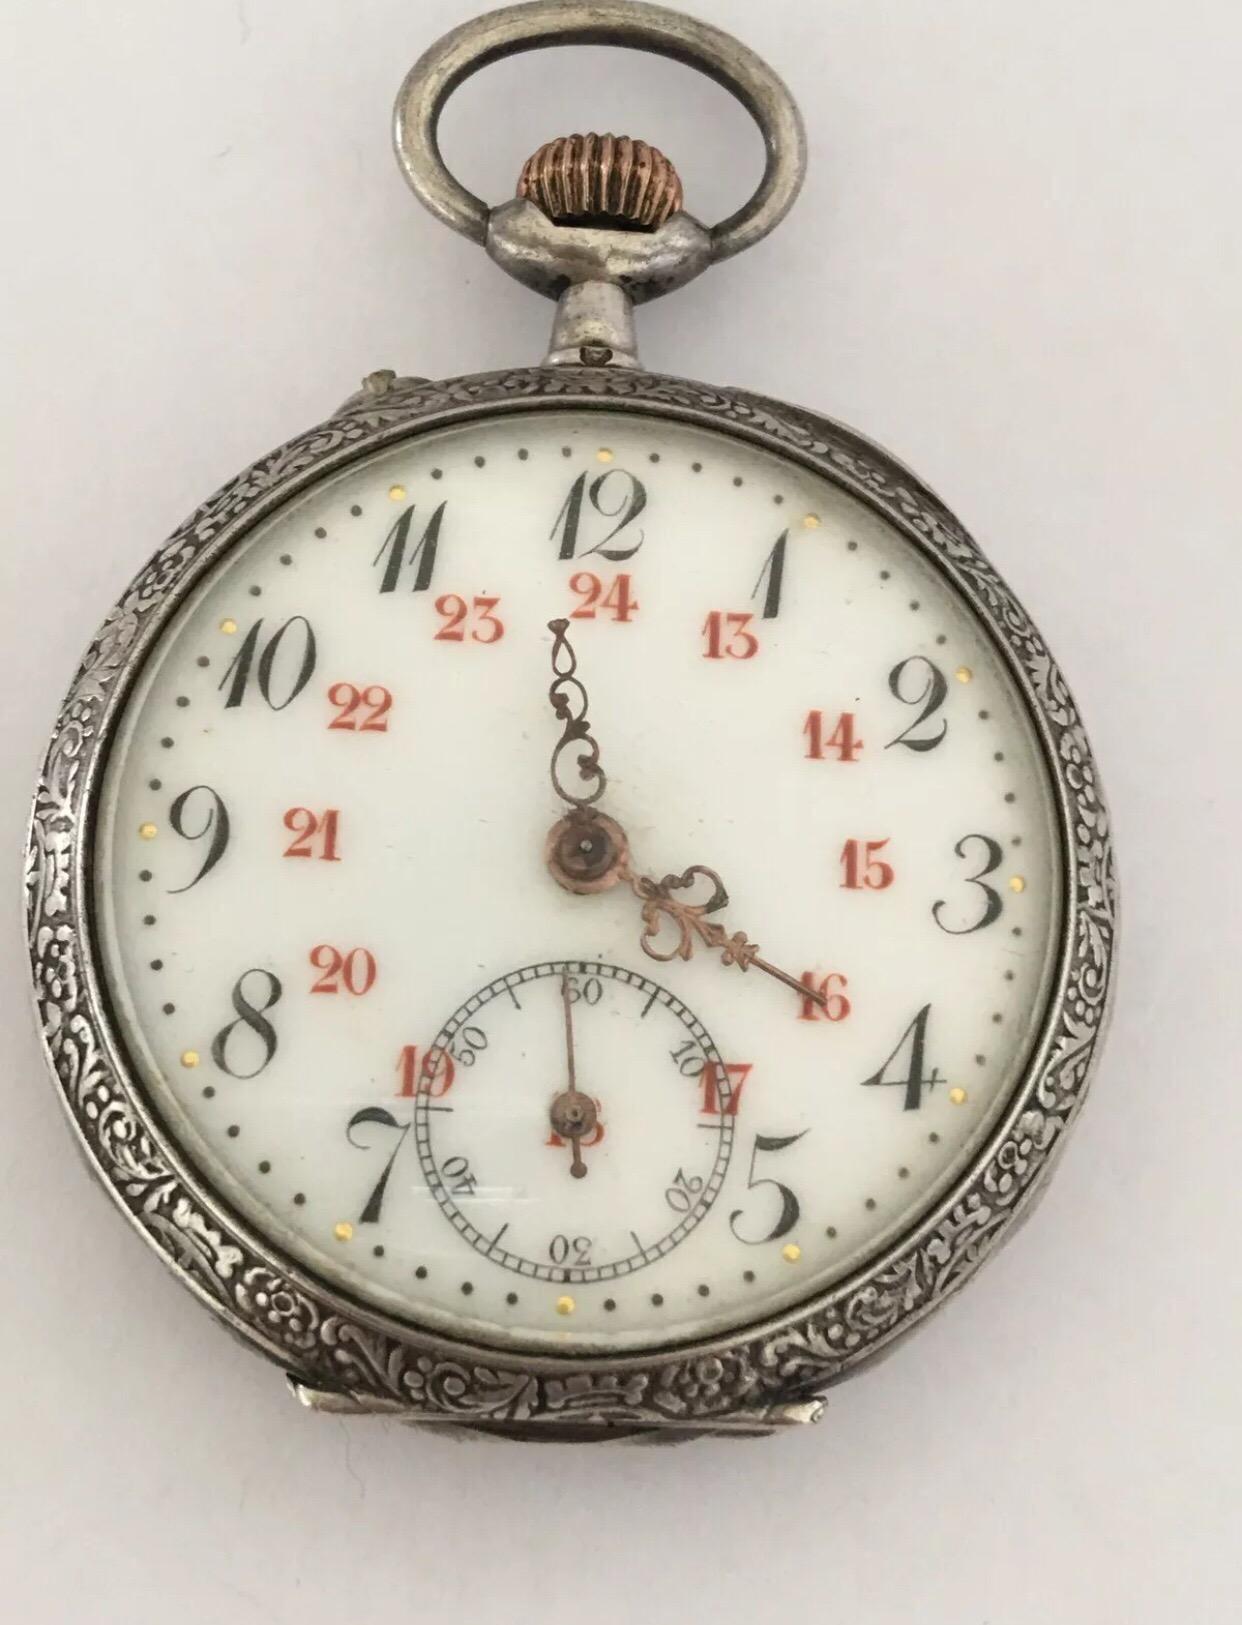 Antique Silver full Engraved Case Pocket Watch (working).


This watch is working and ticking well. However, due to its Age, I cannot guarantee the time accuracy.